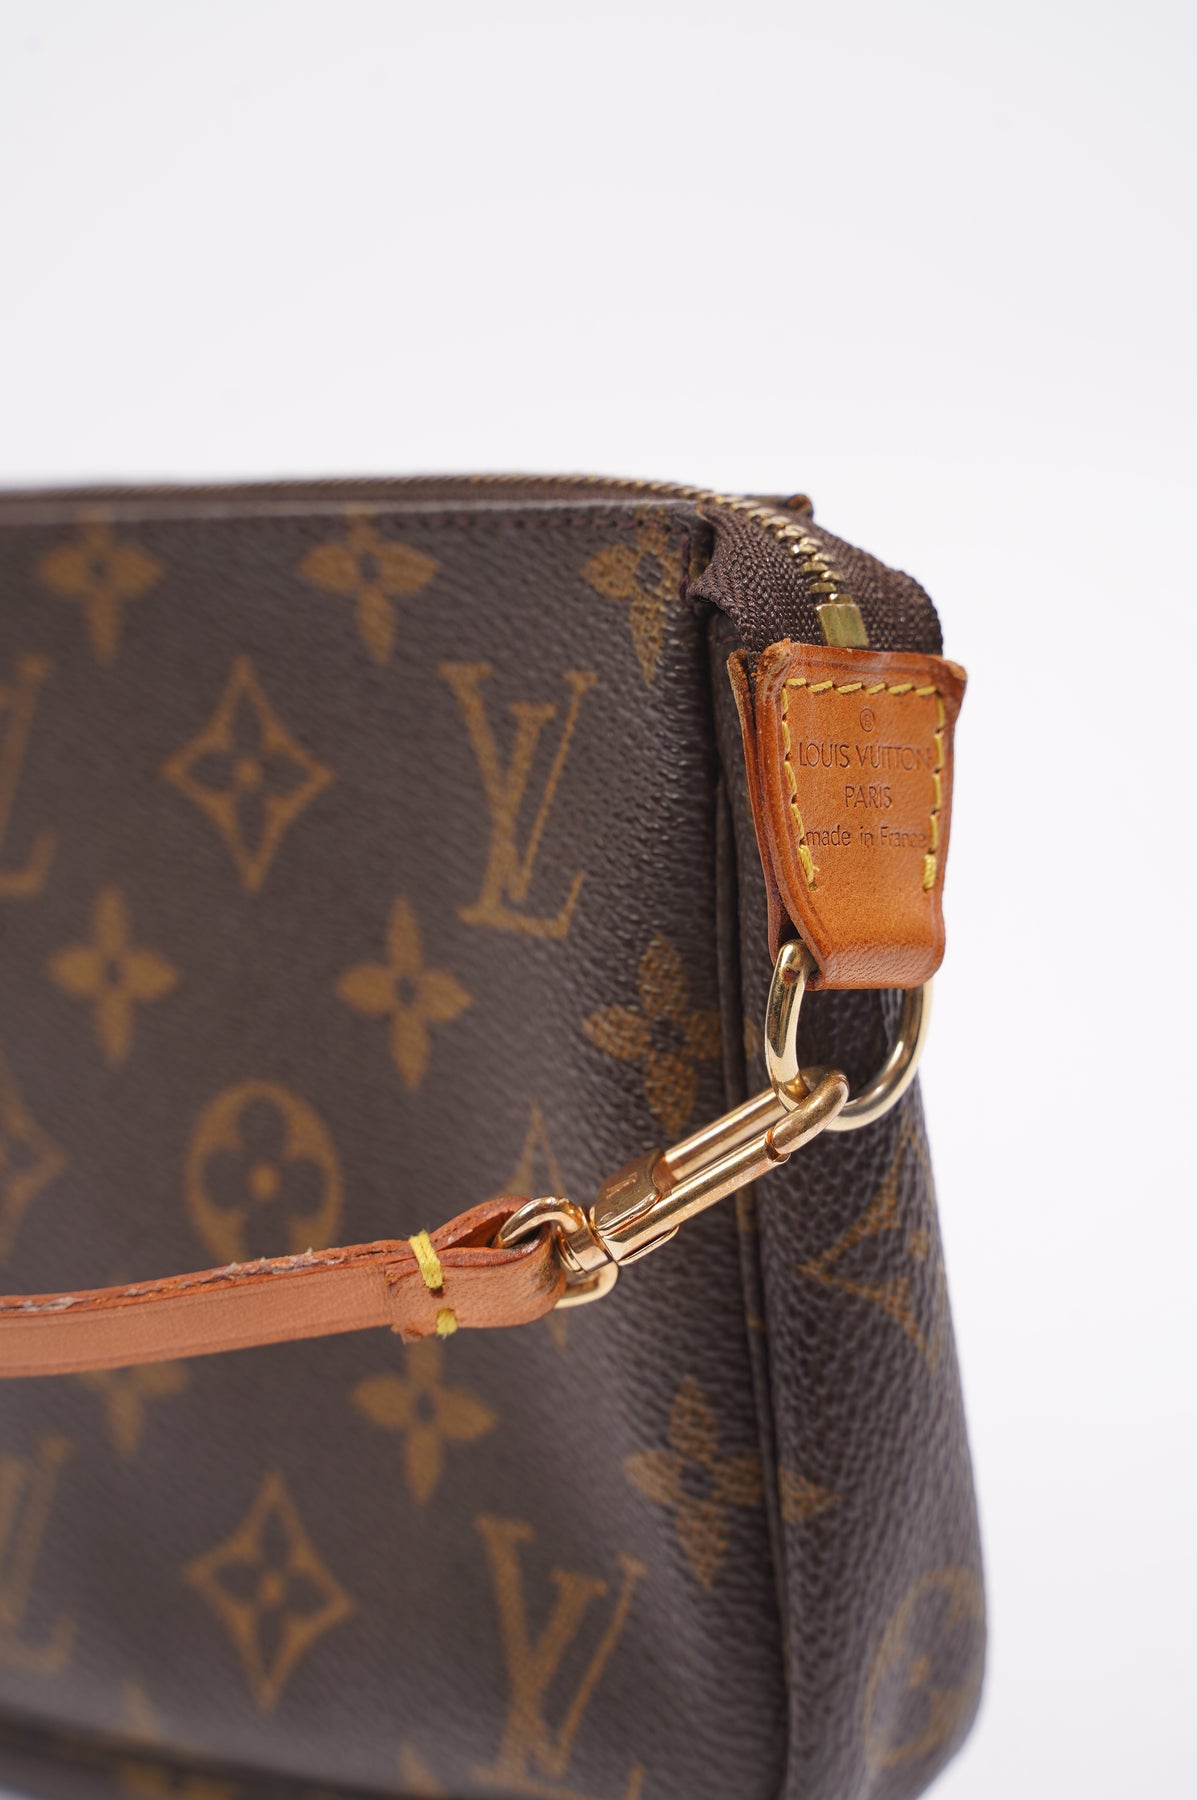 Manila Up Magazine – Connect! » LOUIS VUITTON Exotic Leather Collections  GREENBELT 4, MAKATI CITY